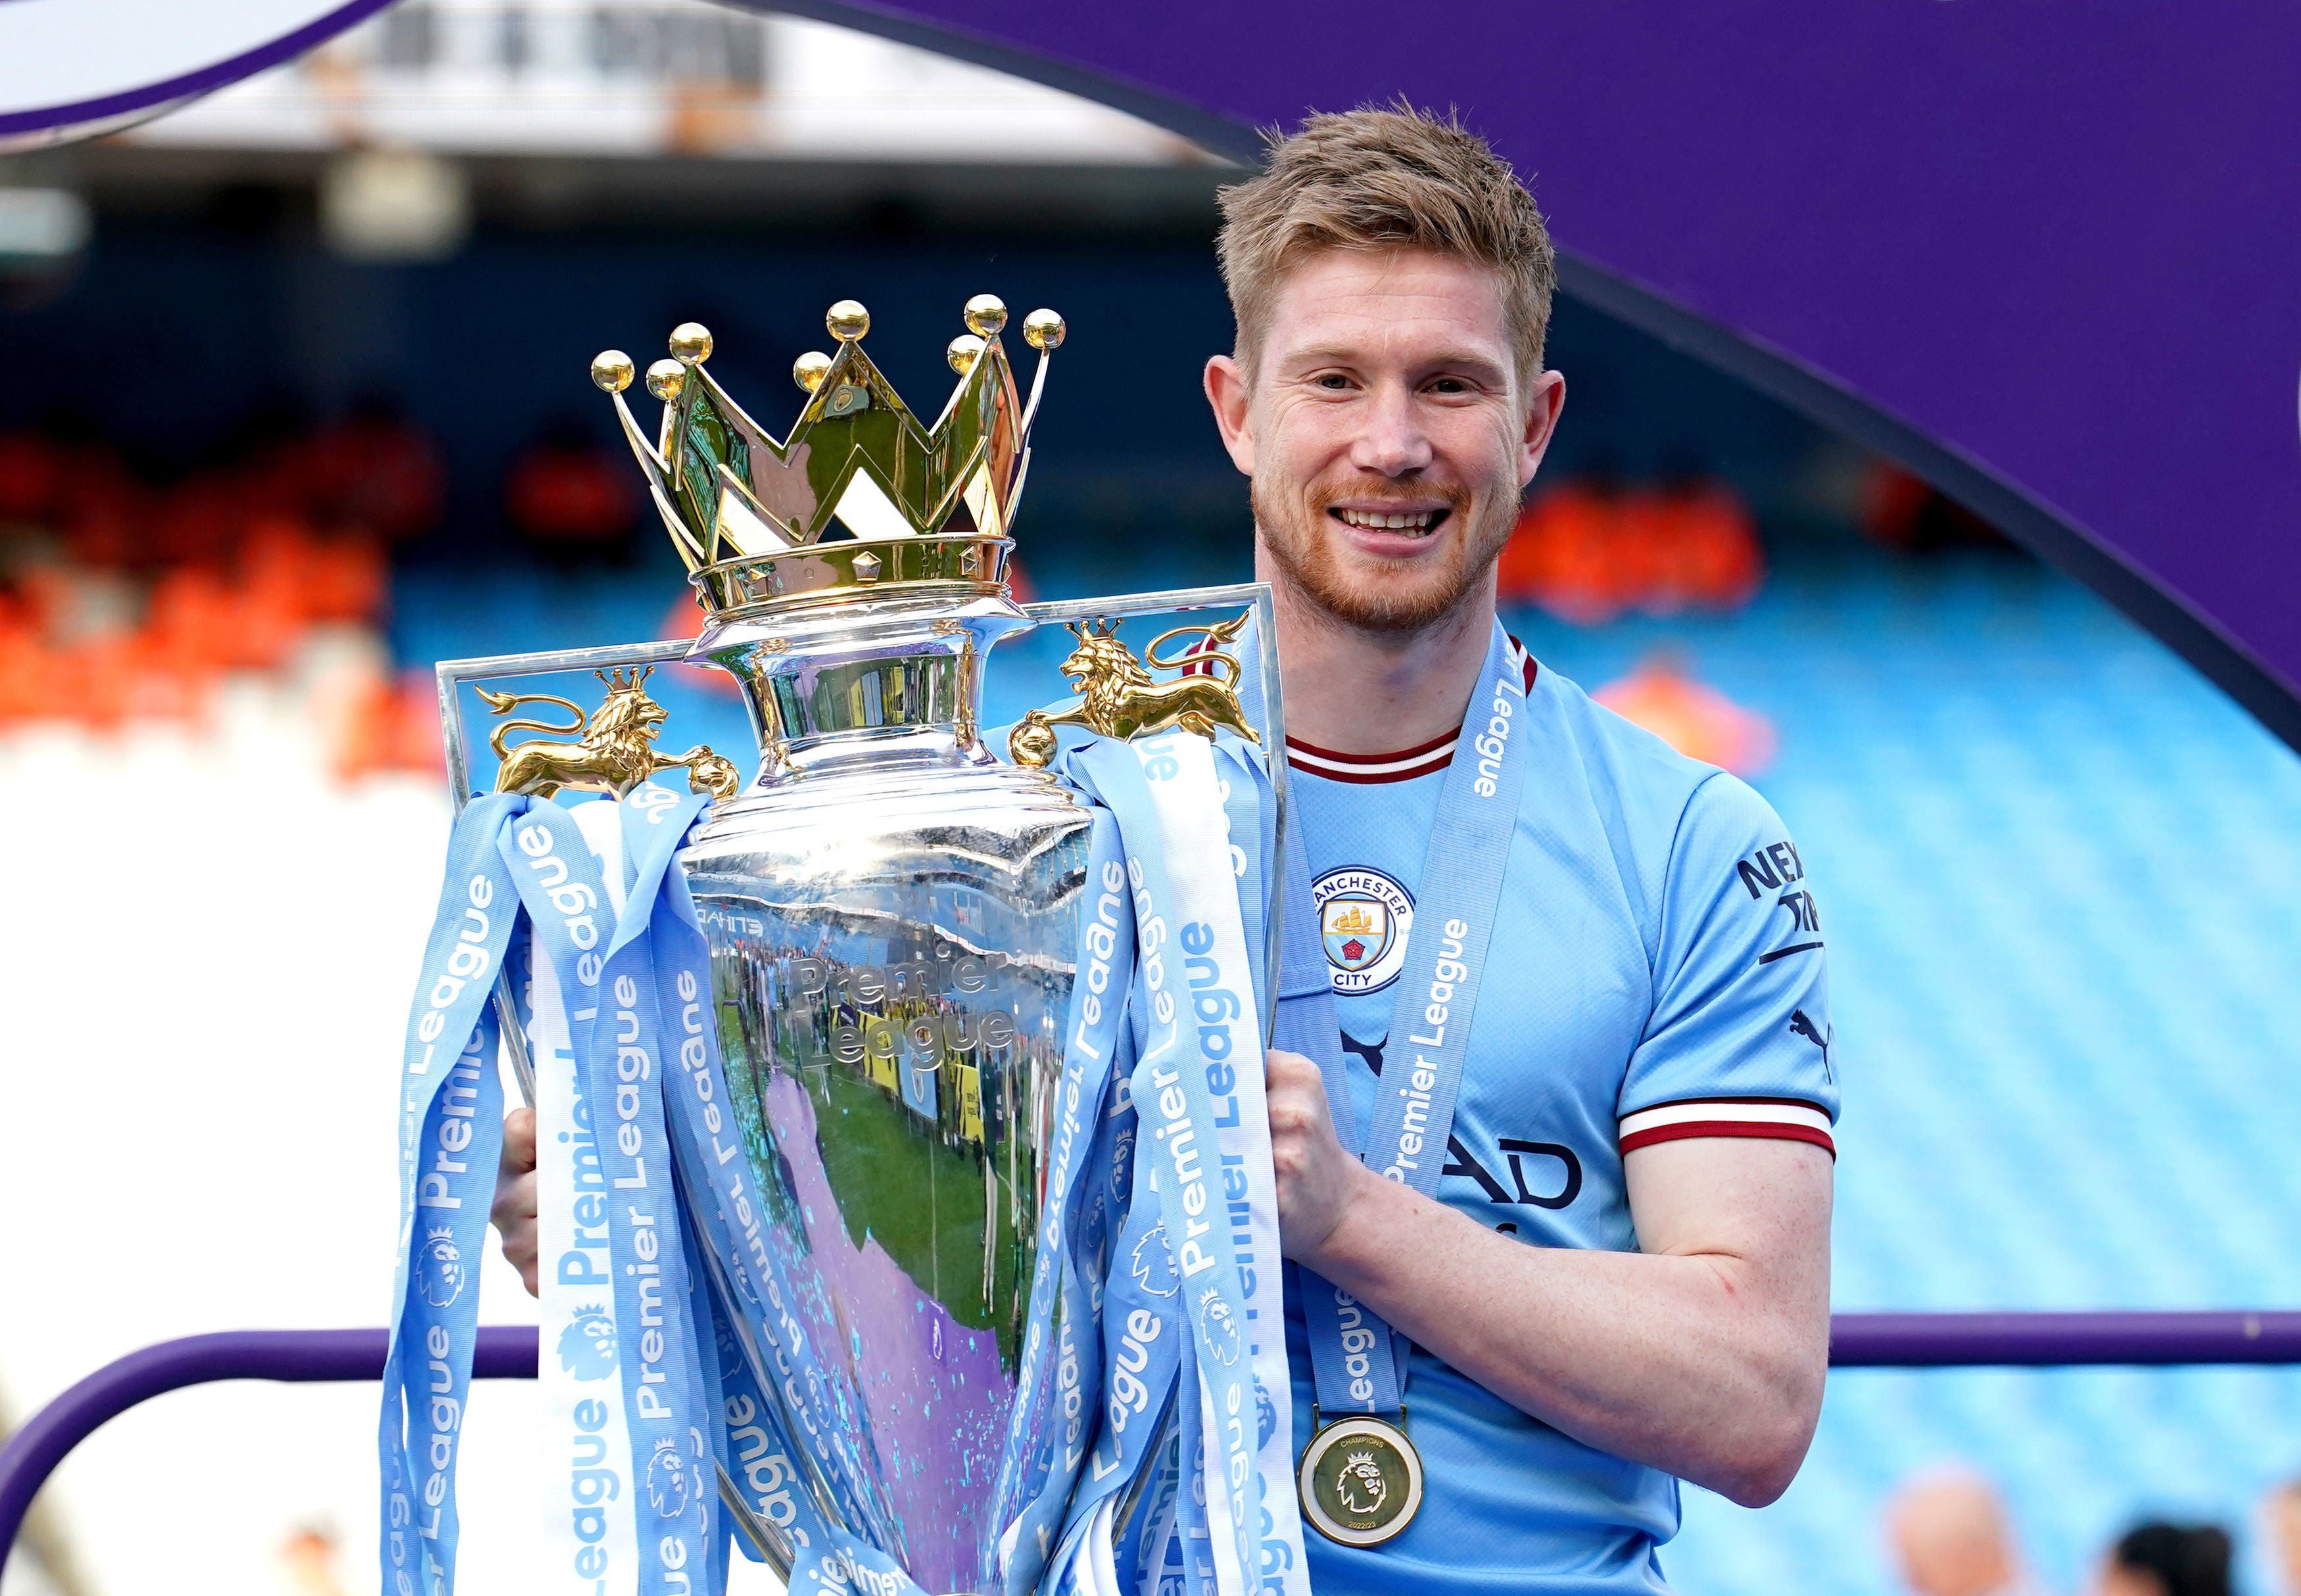 De Bruyne will won a sixth Premier League title if Man City defeat West Ham this weekend.